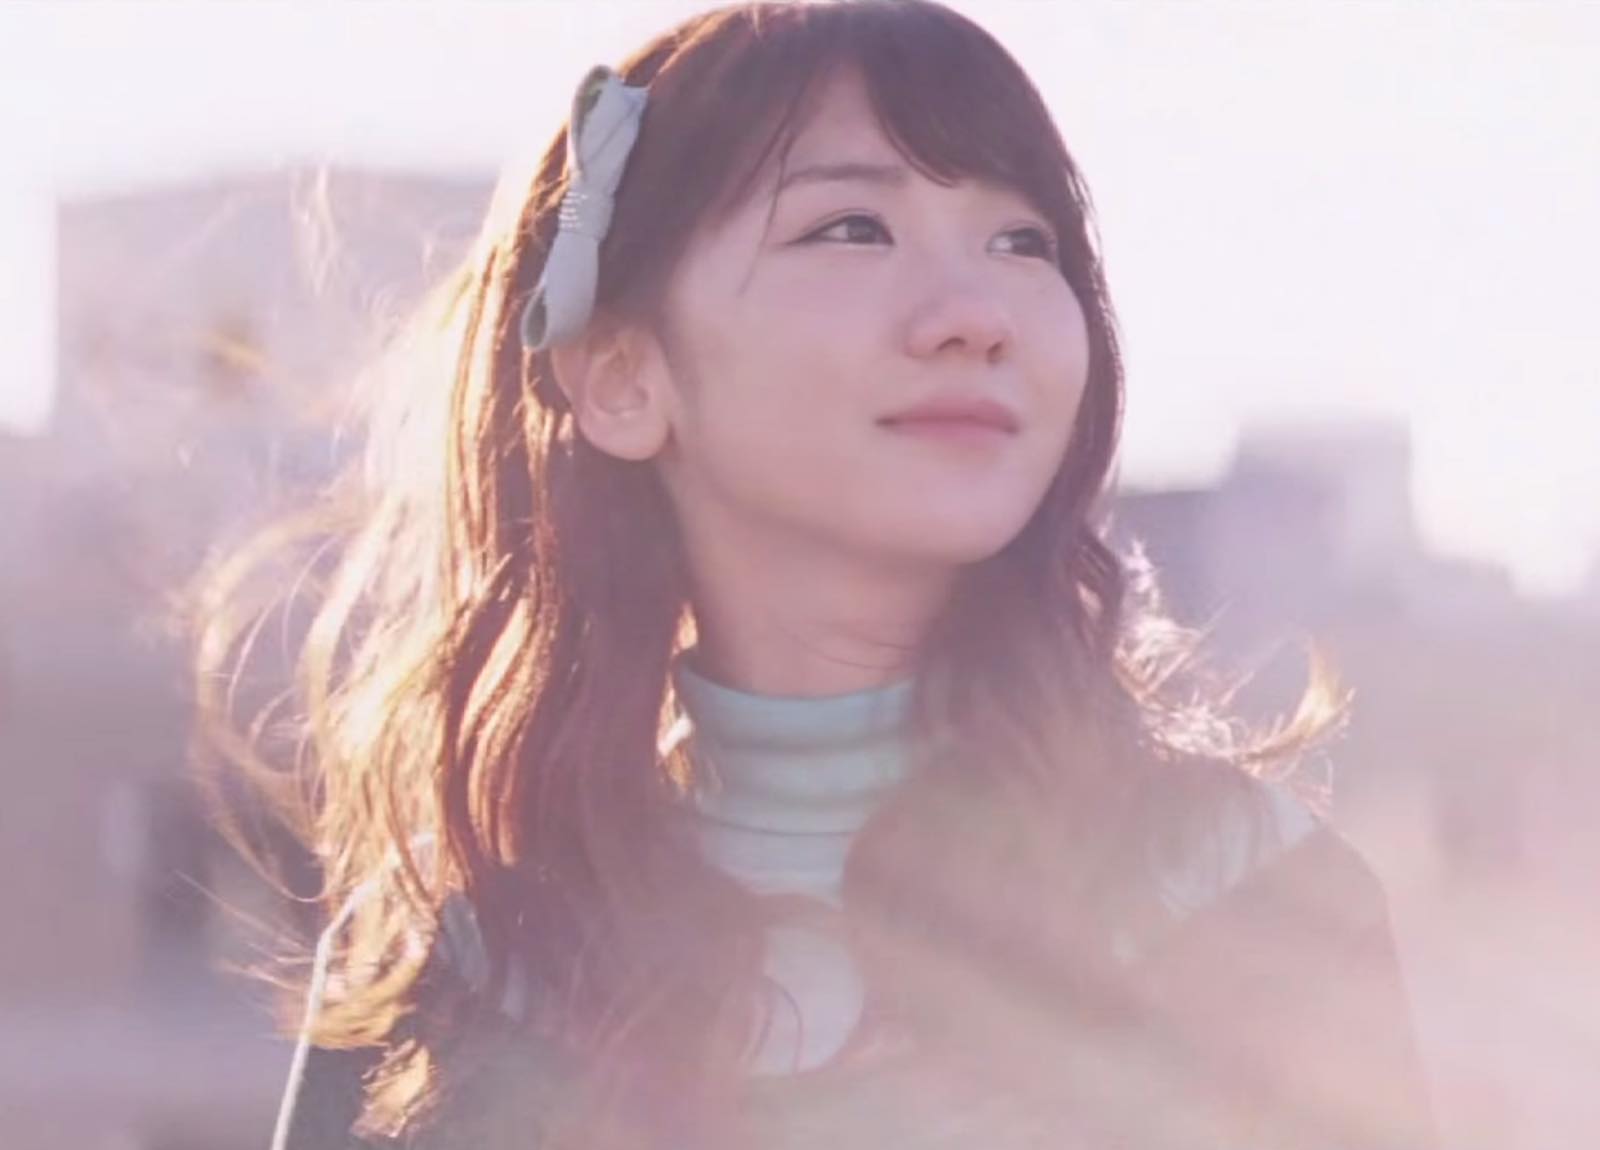 Tears! Forbidden Love! Delinquents! Grandmas! AKB48 Unleashes a Dark First Wave of MVs From “Green Flash”!